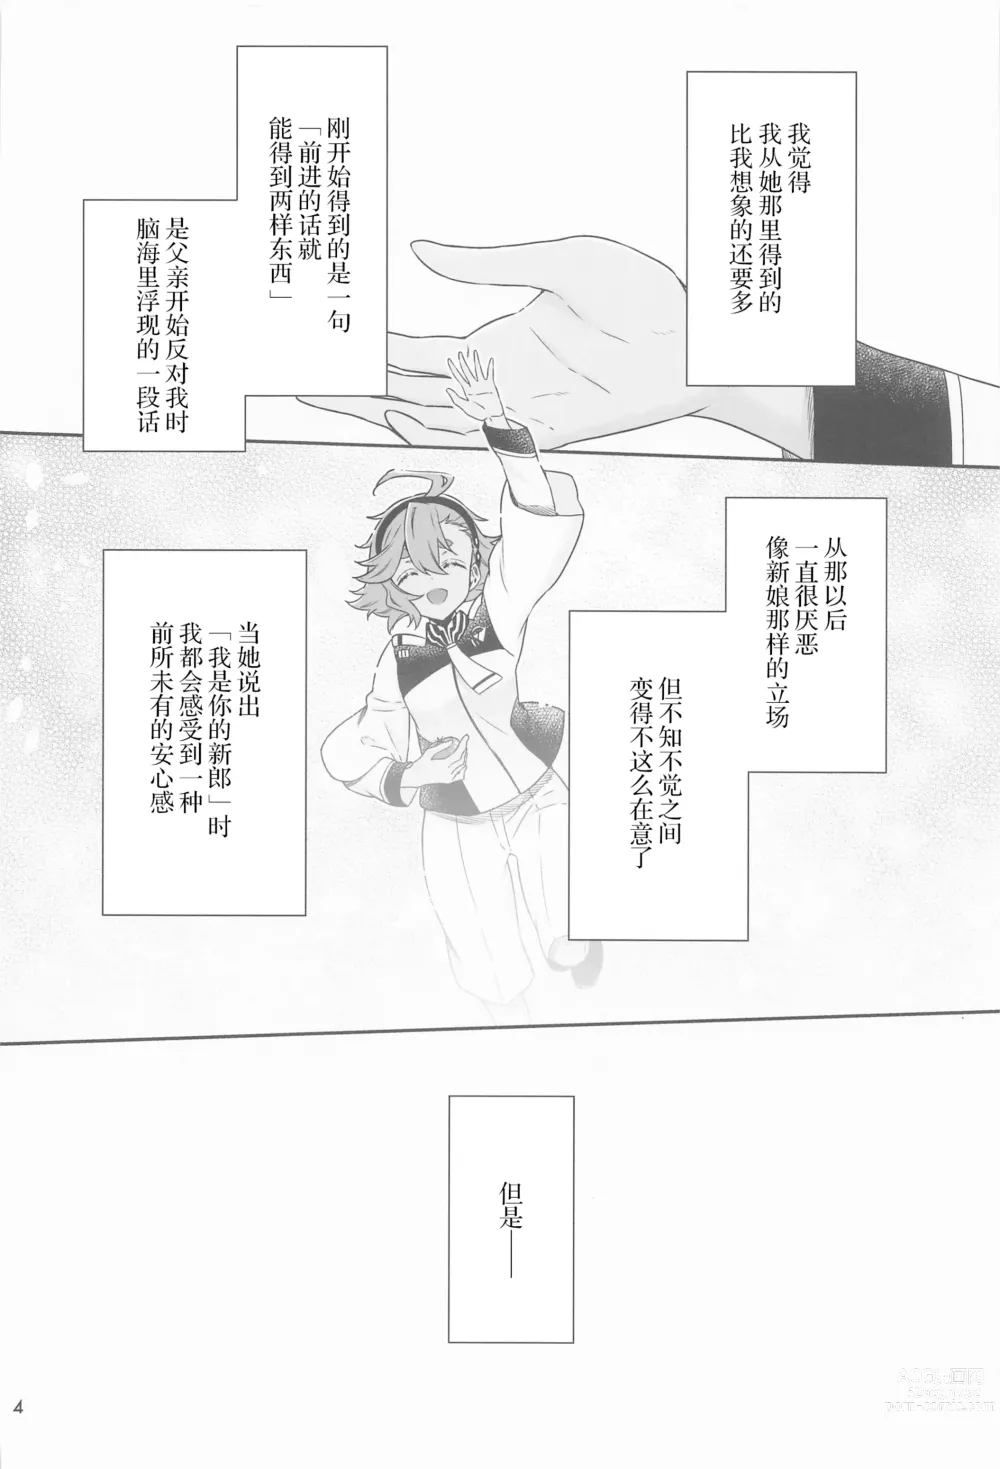 Page 4 of doujinshi 祝福之日